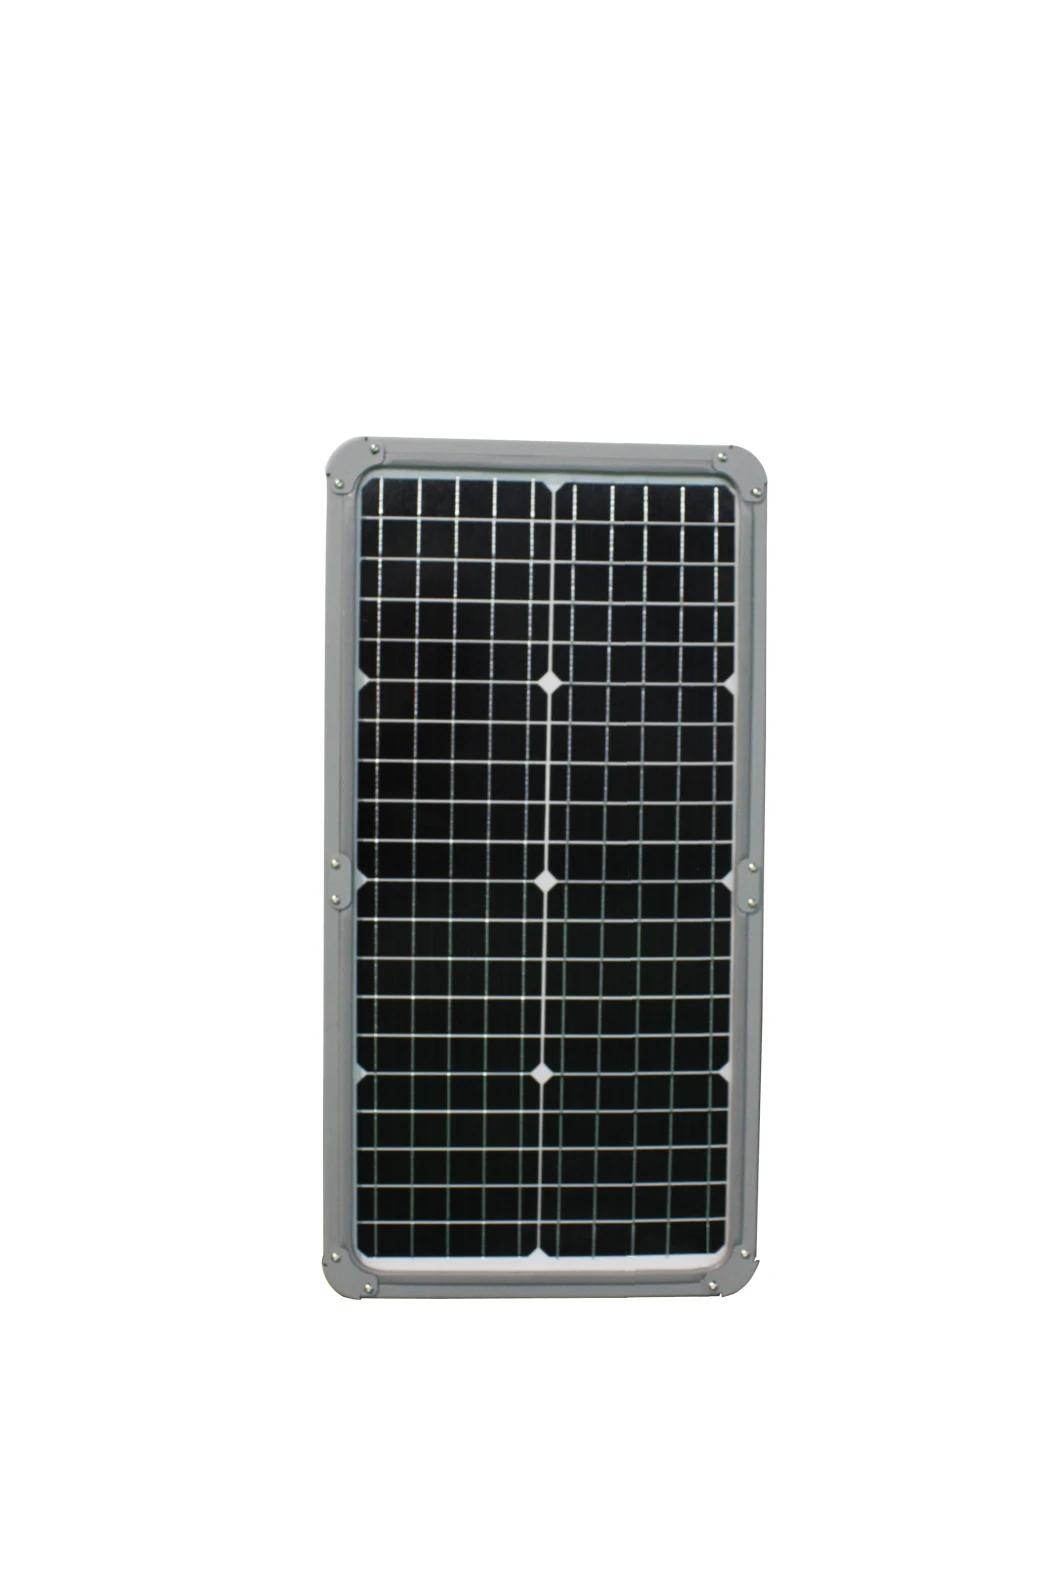 OEM/ODM 30W-80W Integrated Solar LED Street Light Manufacturer in China